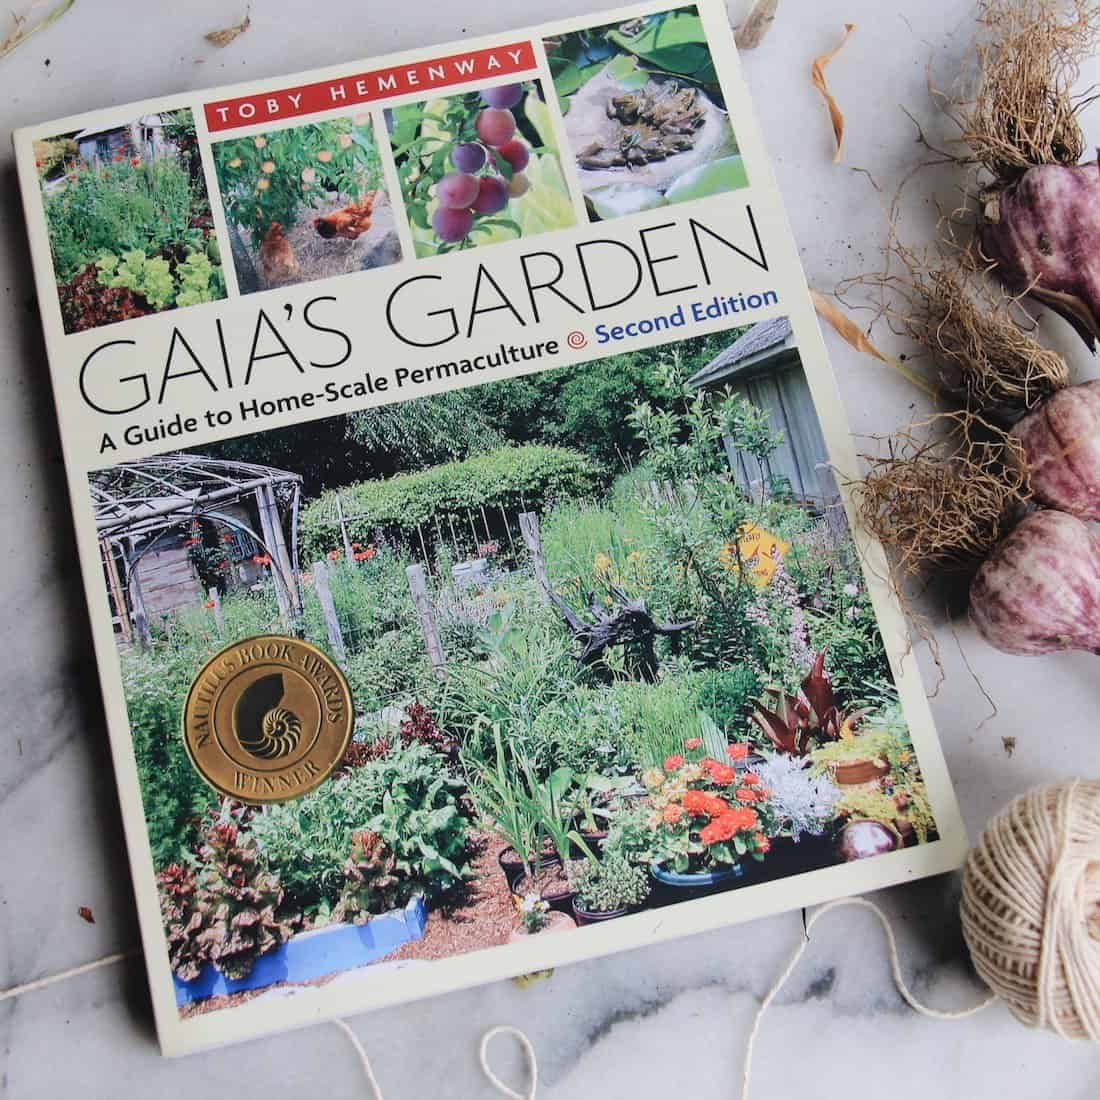 Gaia's garden book | list of gardening books - the best ones! | from home for the harvest | www. Homefortheharvest. Com